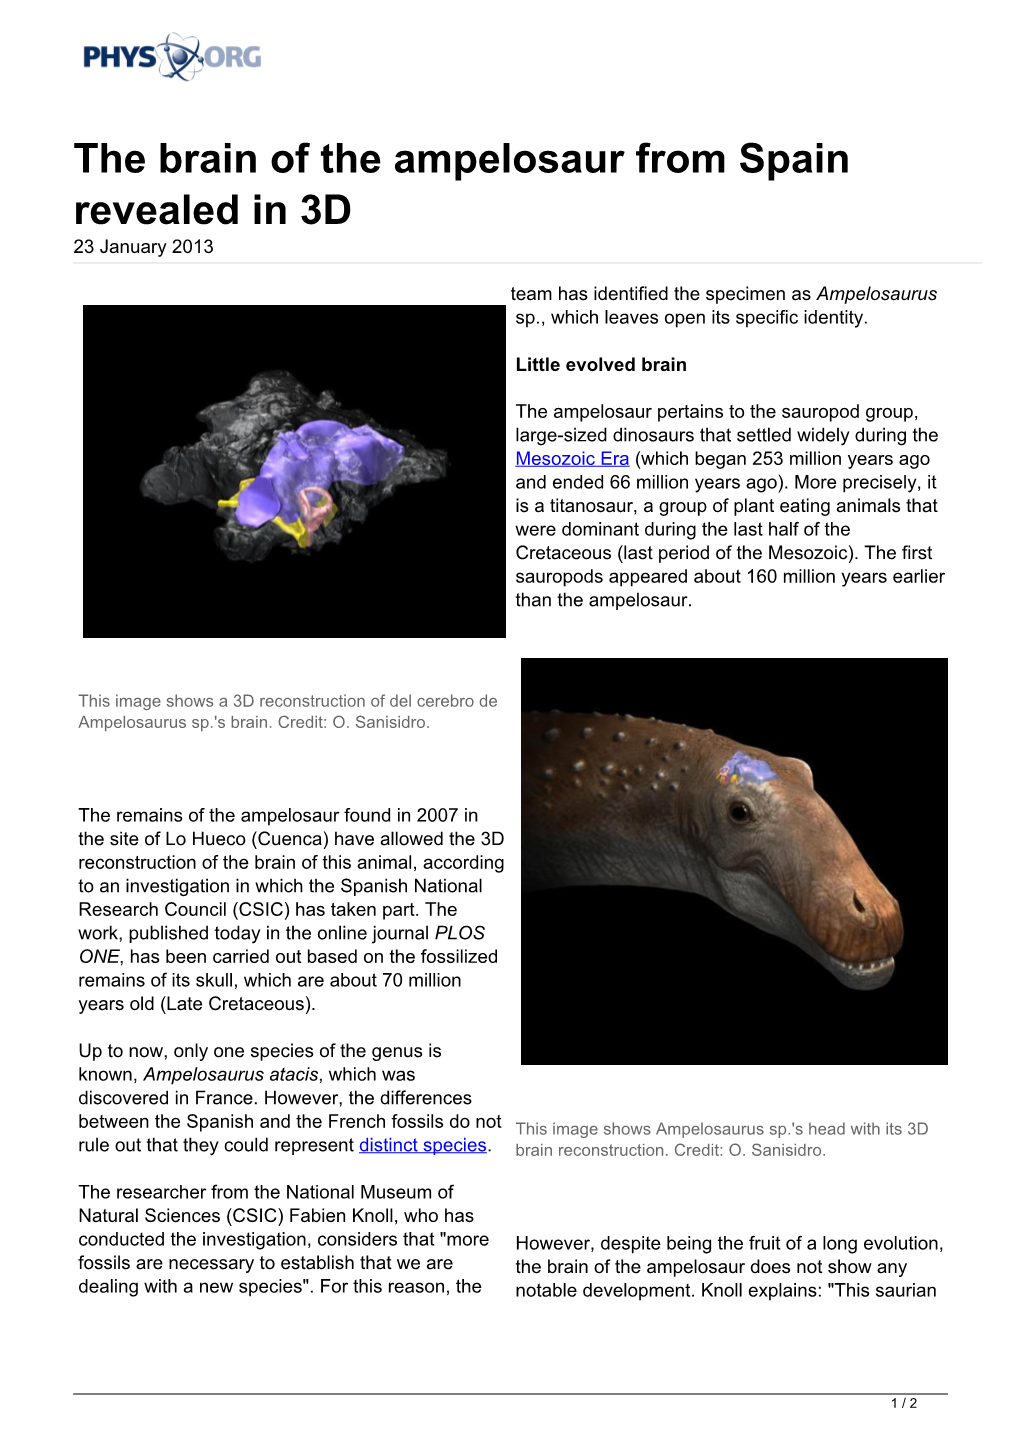 The Brain of the Ampelosaur from Spain Revealed in 3D 23 January 2013